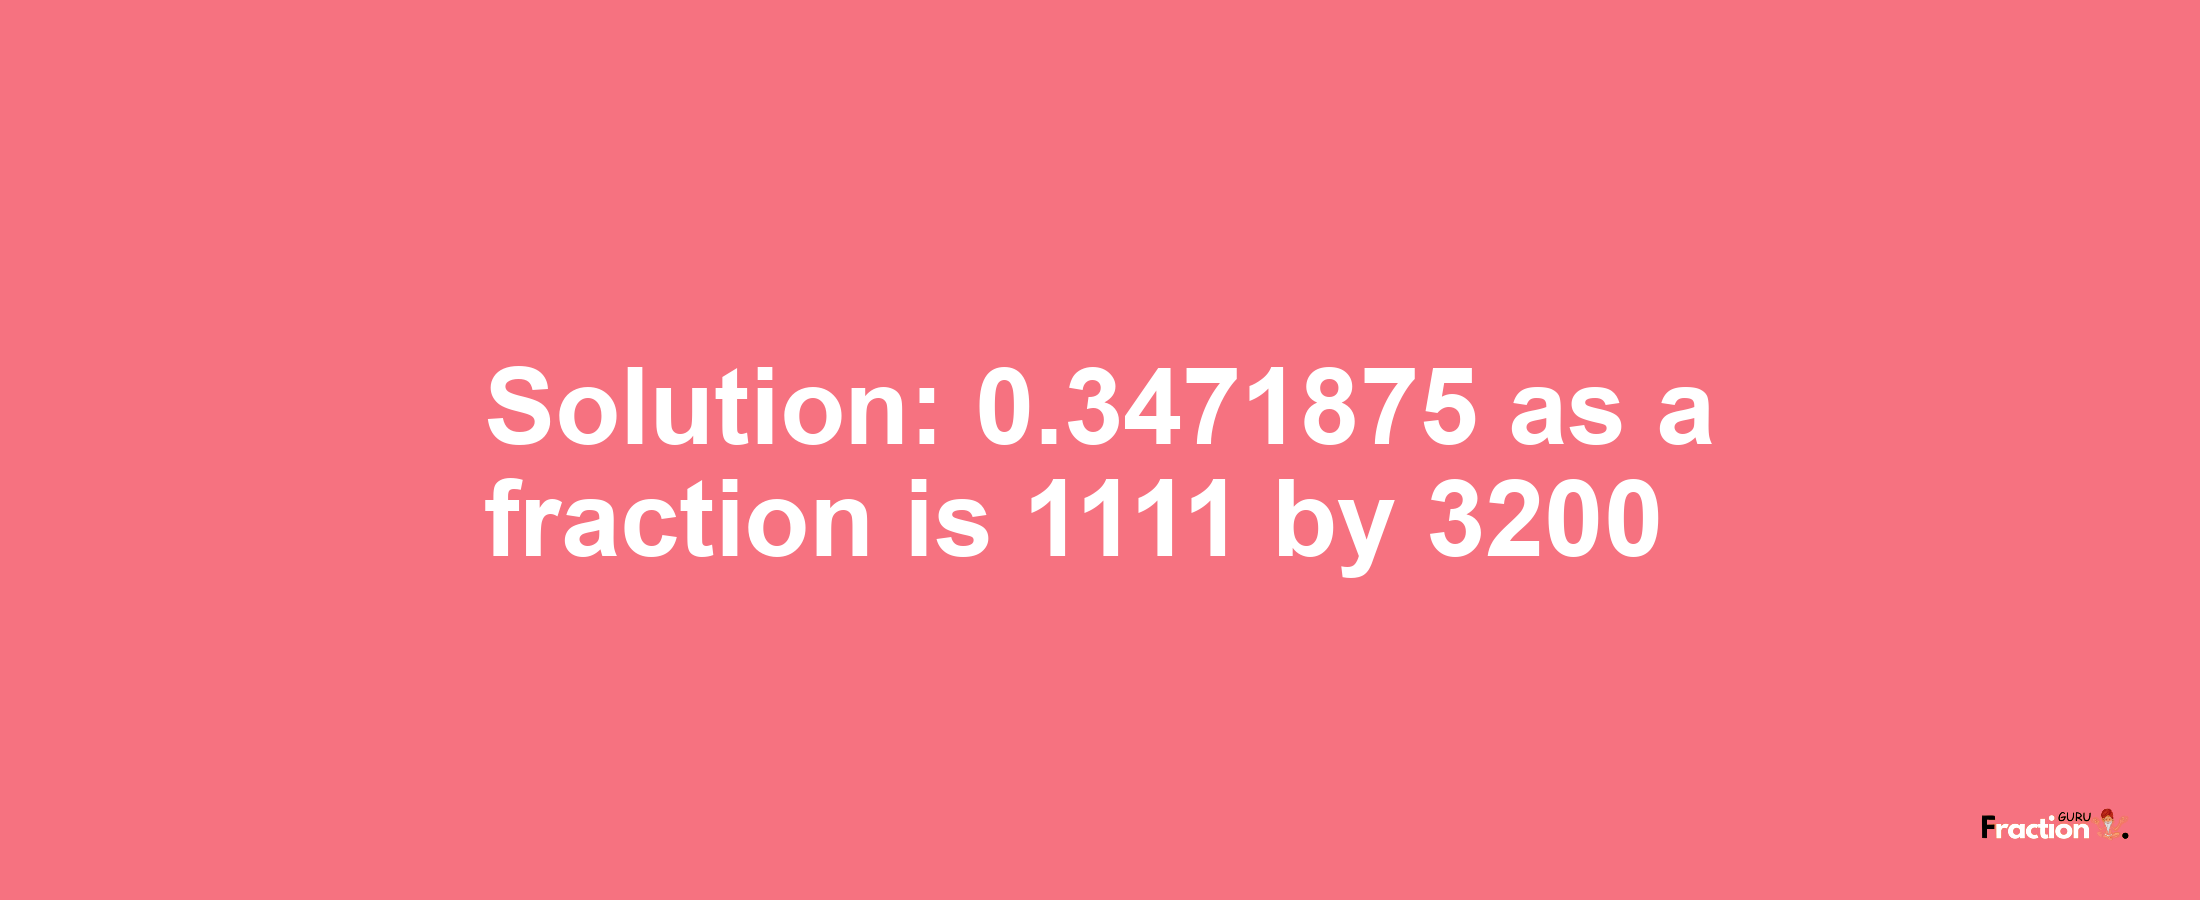 Solution:0.3471875 as a fraction is 1111/3200